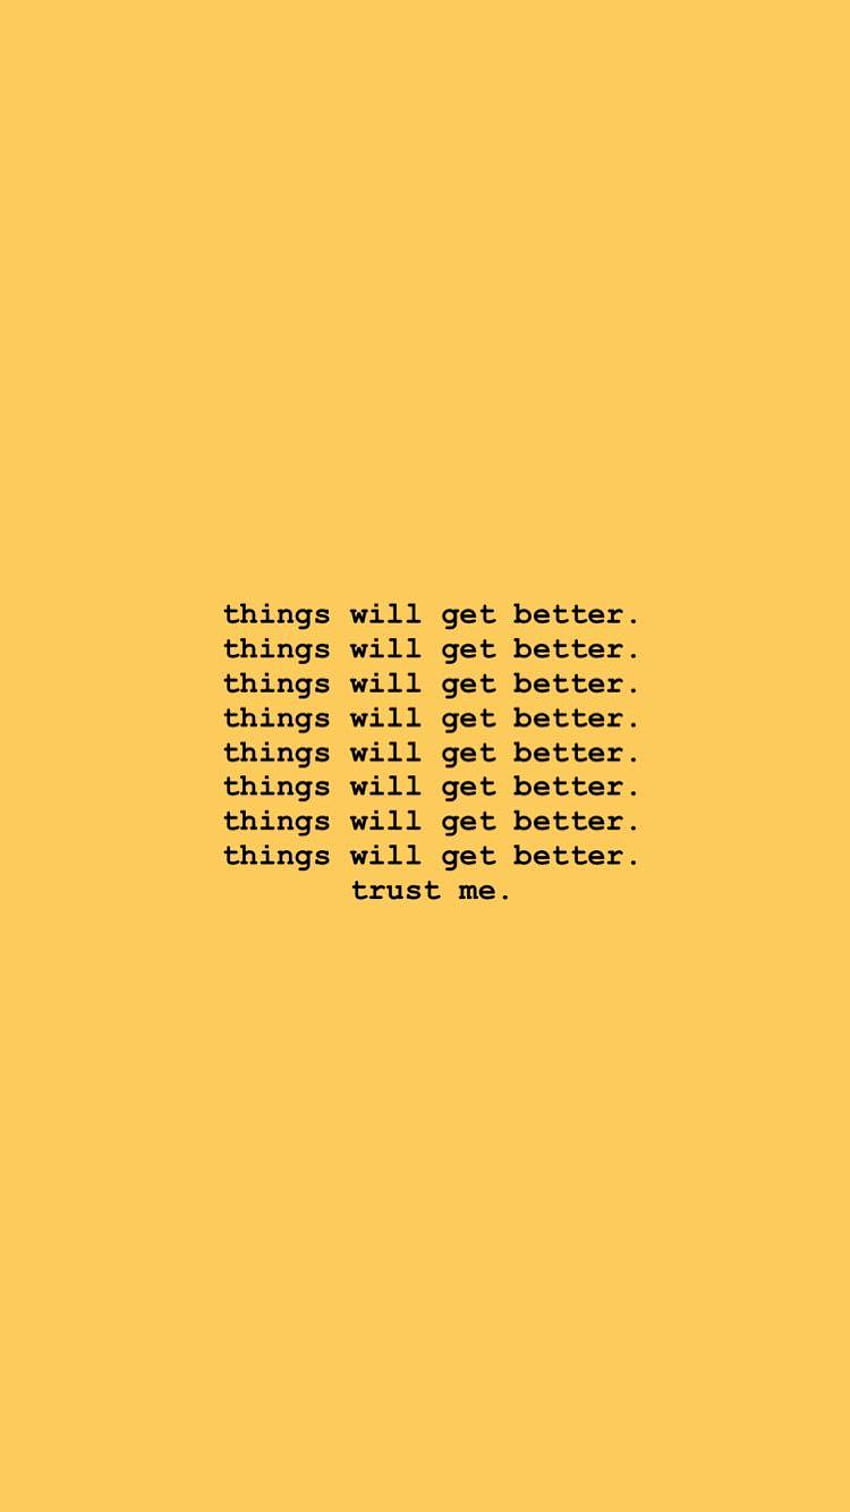 things will get better. trust me, yellow quotes HD phone wallpaper